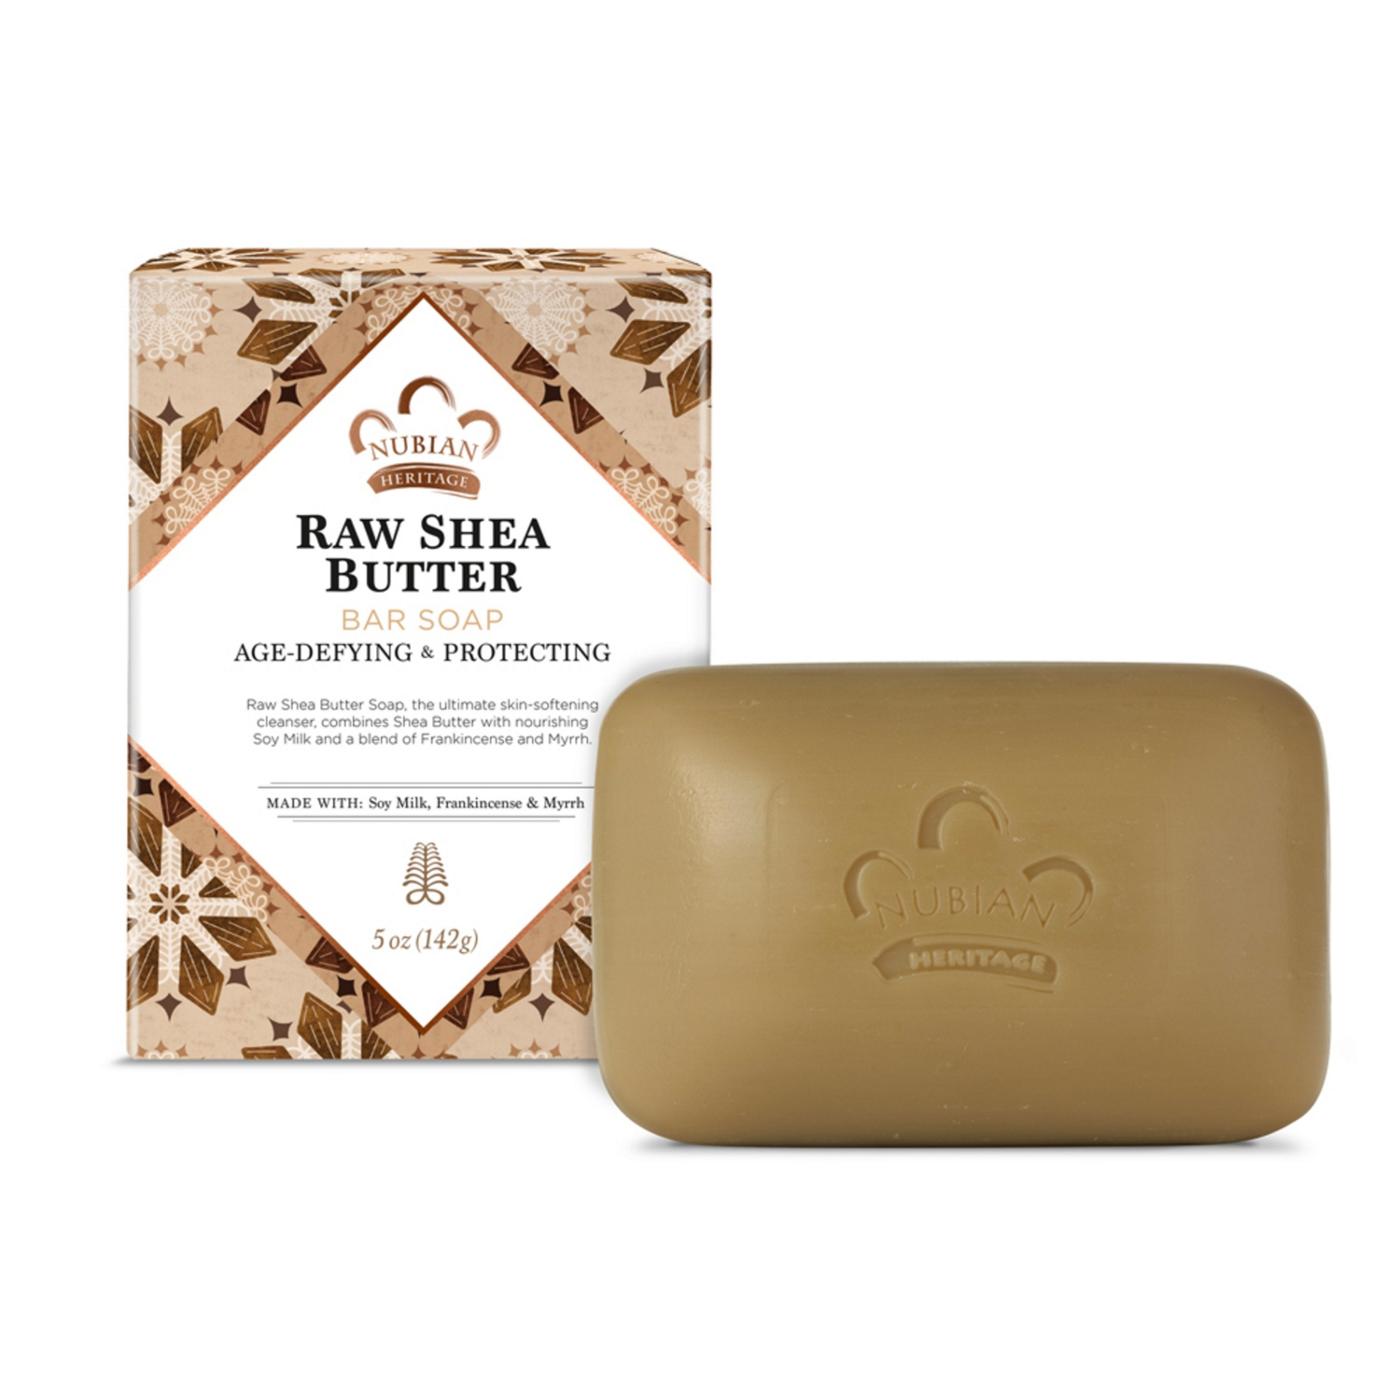 Nubian Heritage Raw Shea Butter Bar Soap; image 3 of 4